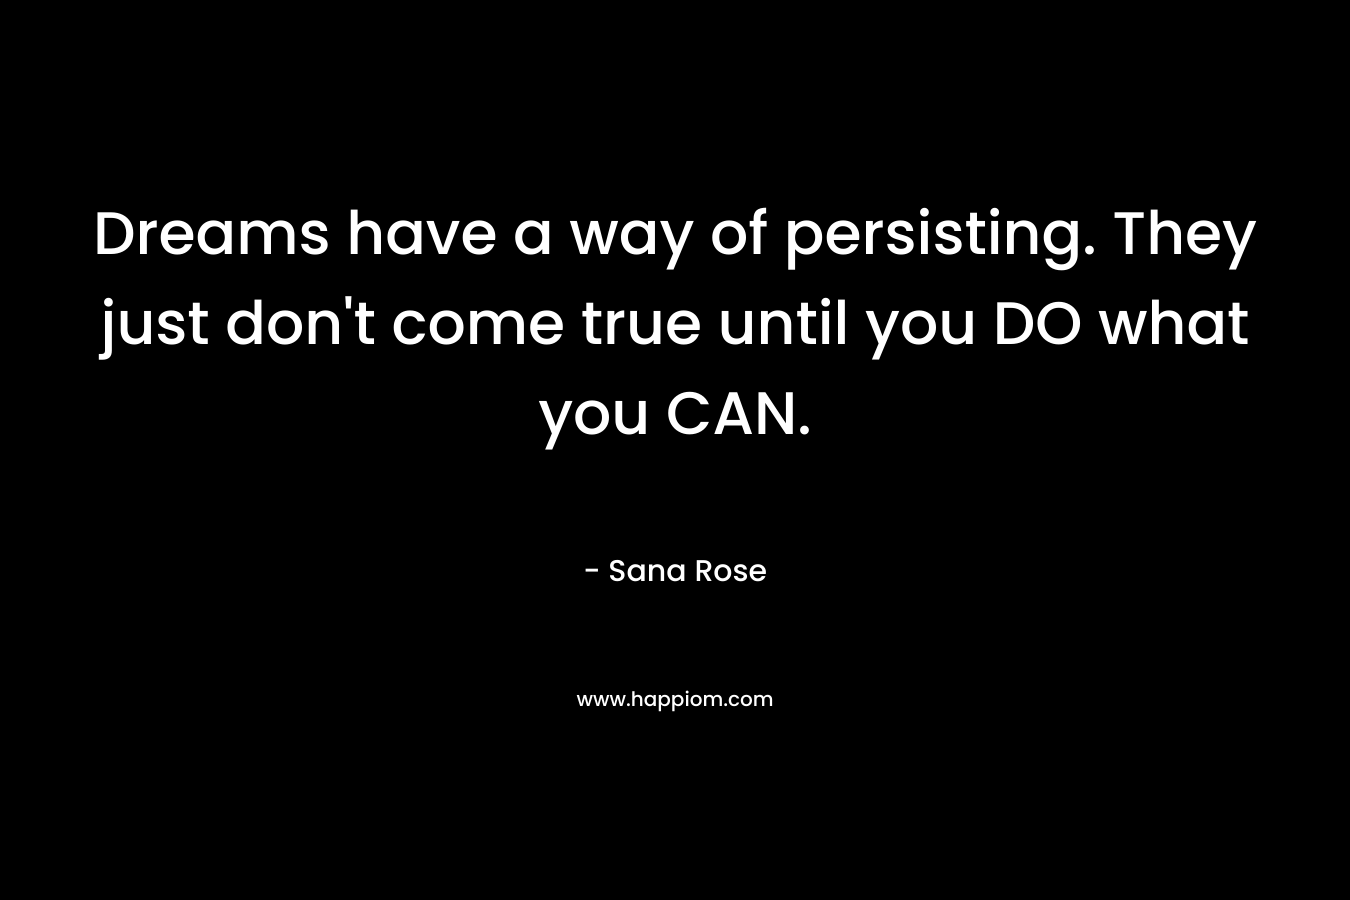 Dreams have a way of persisting. They just don’t come true until you DO what you CAN. – Sana Rose